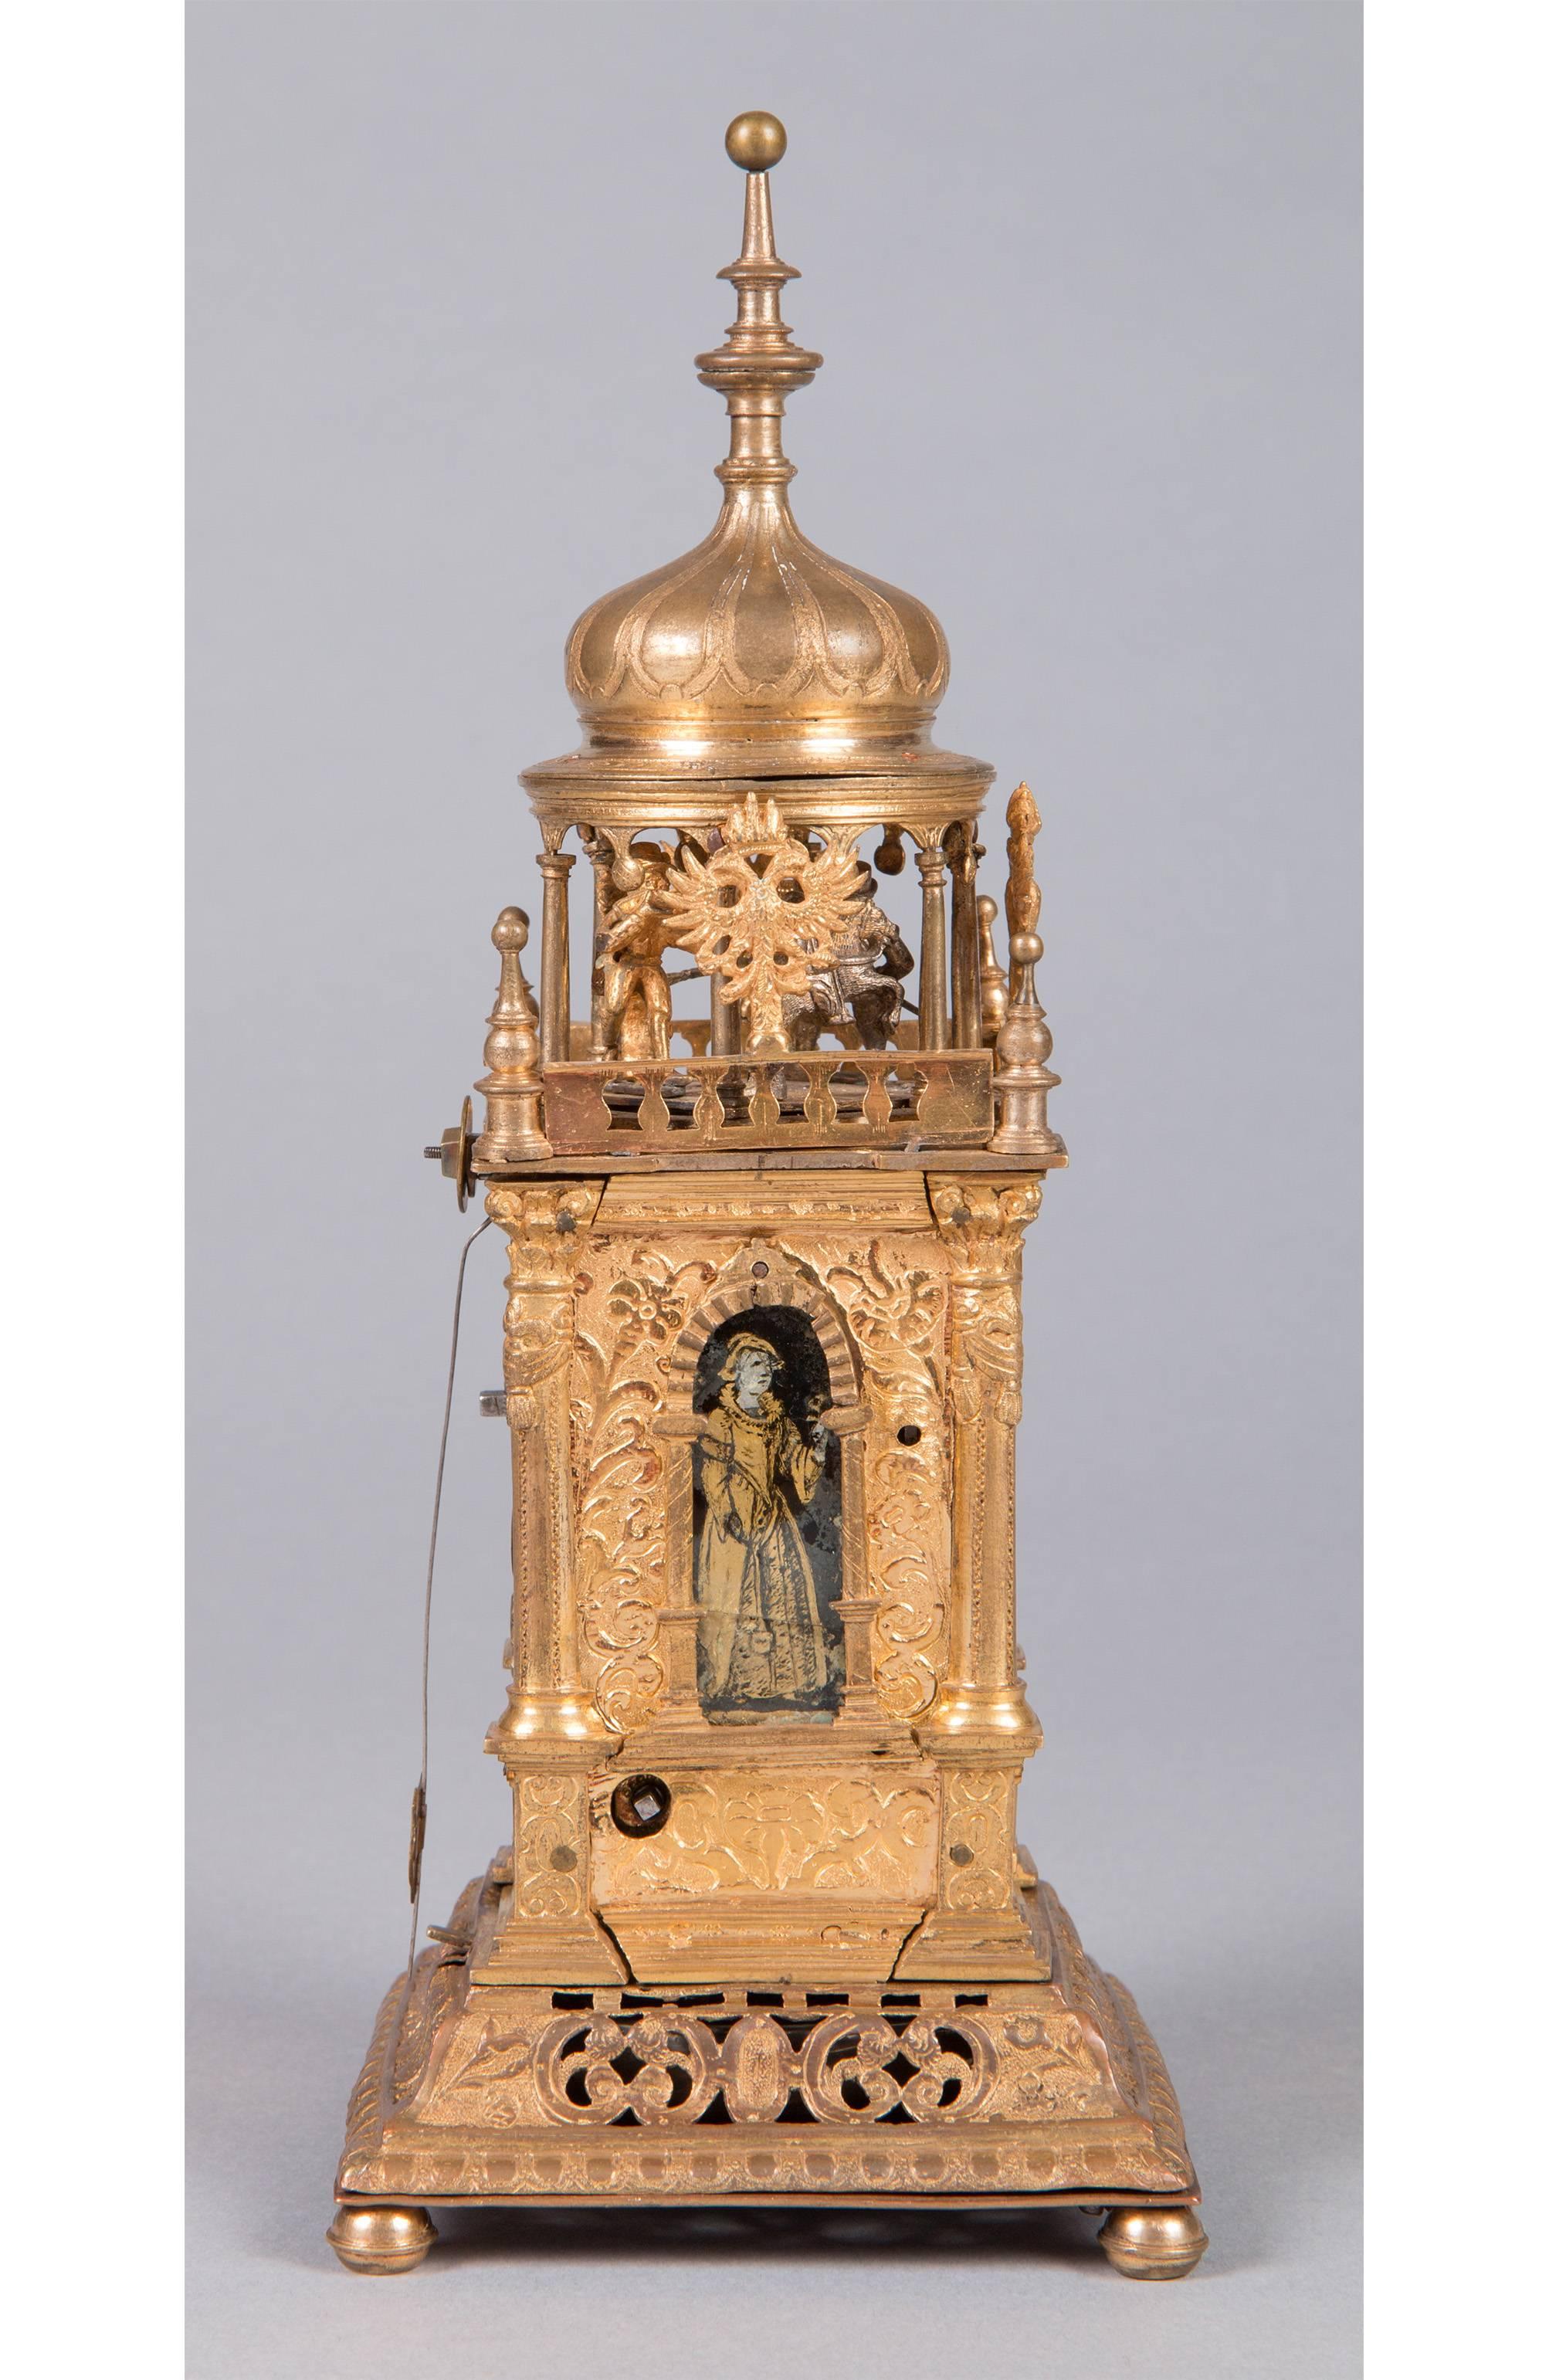 Renaissance Early 17th Century Gilt Brass Table Clock, Augsburg ‘South Germany’, circa 1600 For Sale